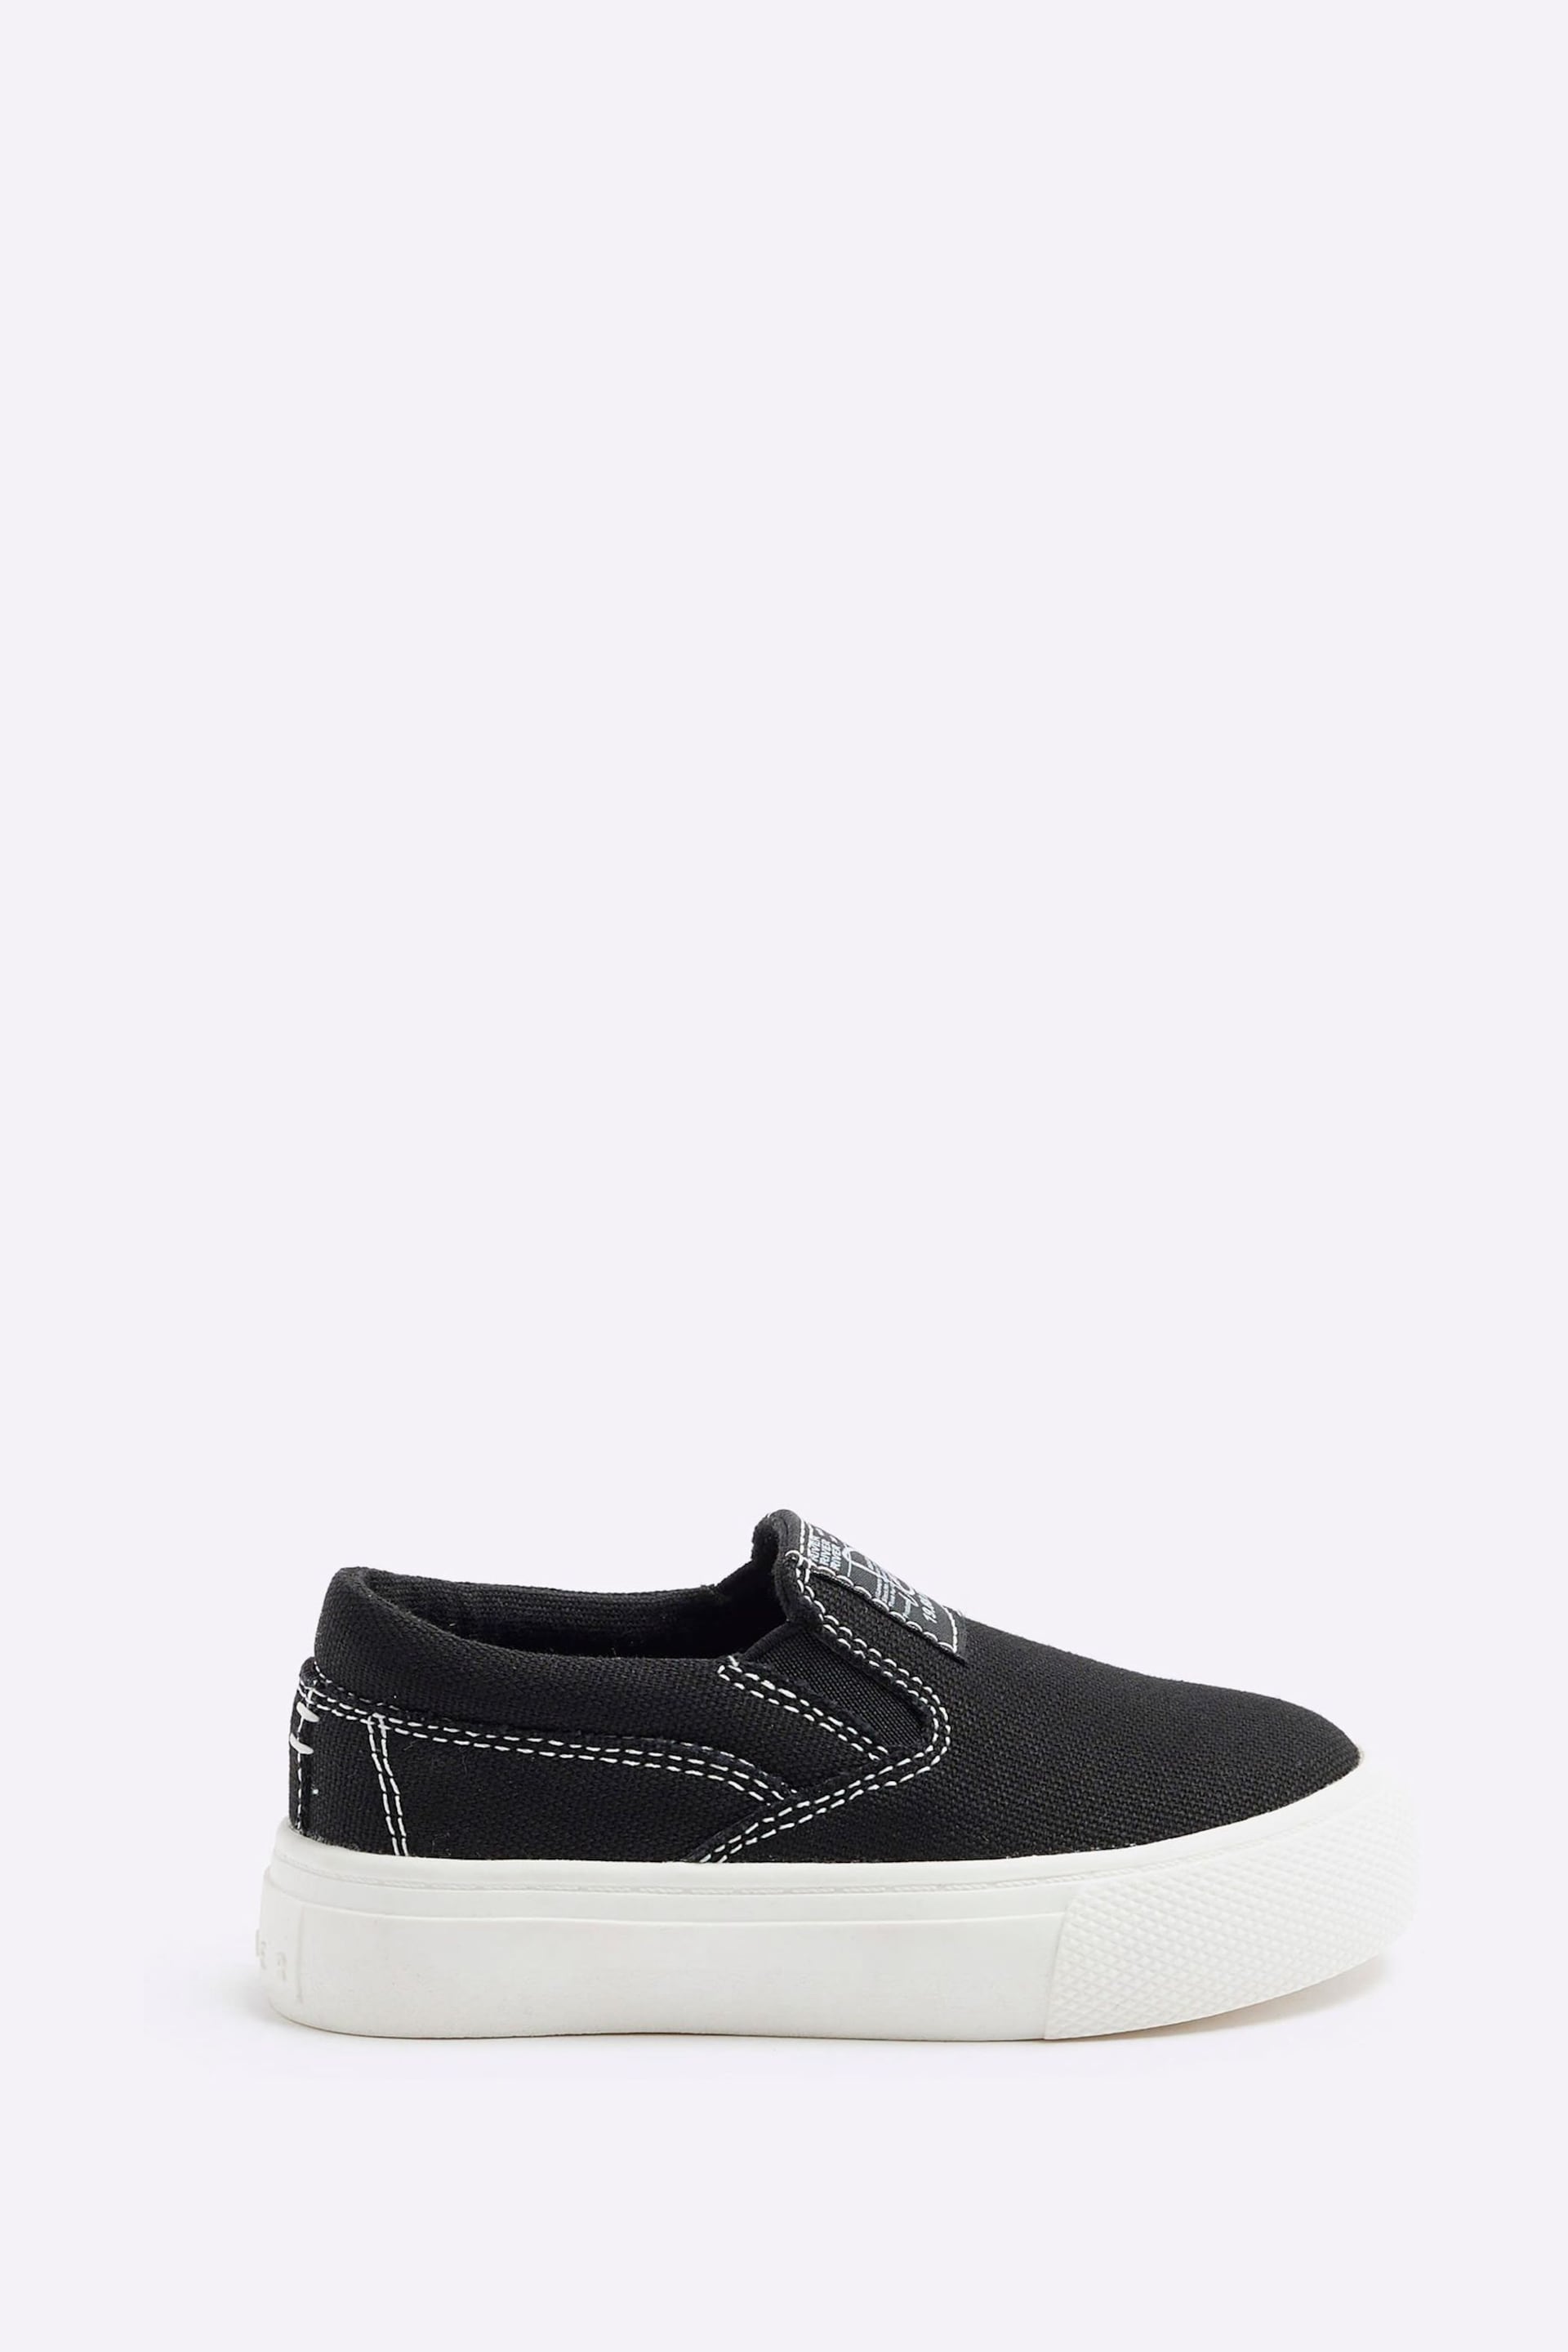 River Island Black Boys Canvas Slip-Ons Trainers - Image 1 of 4